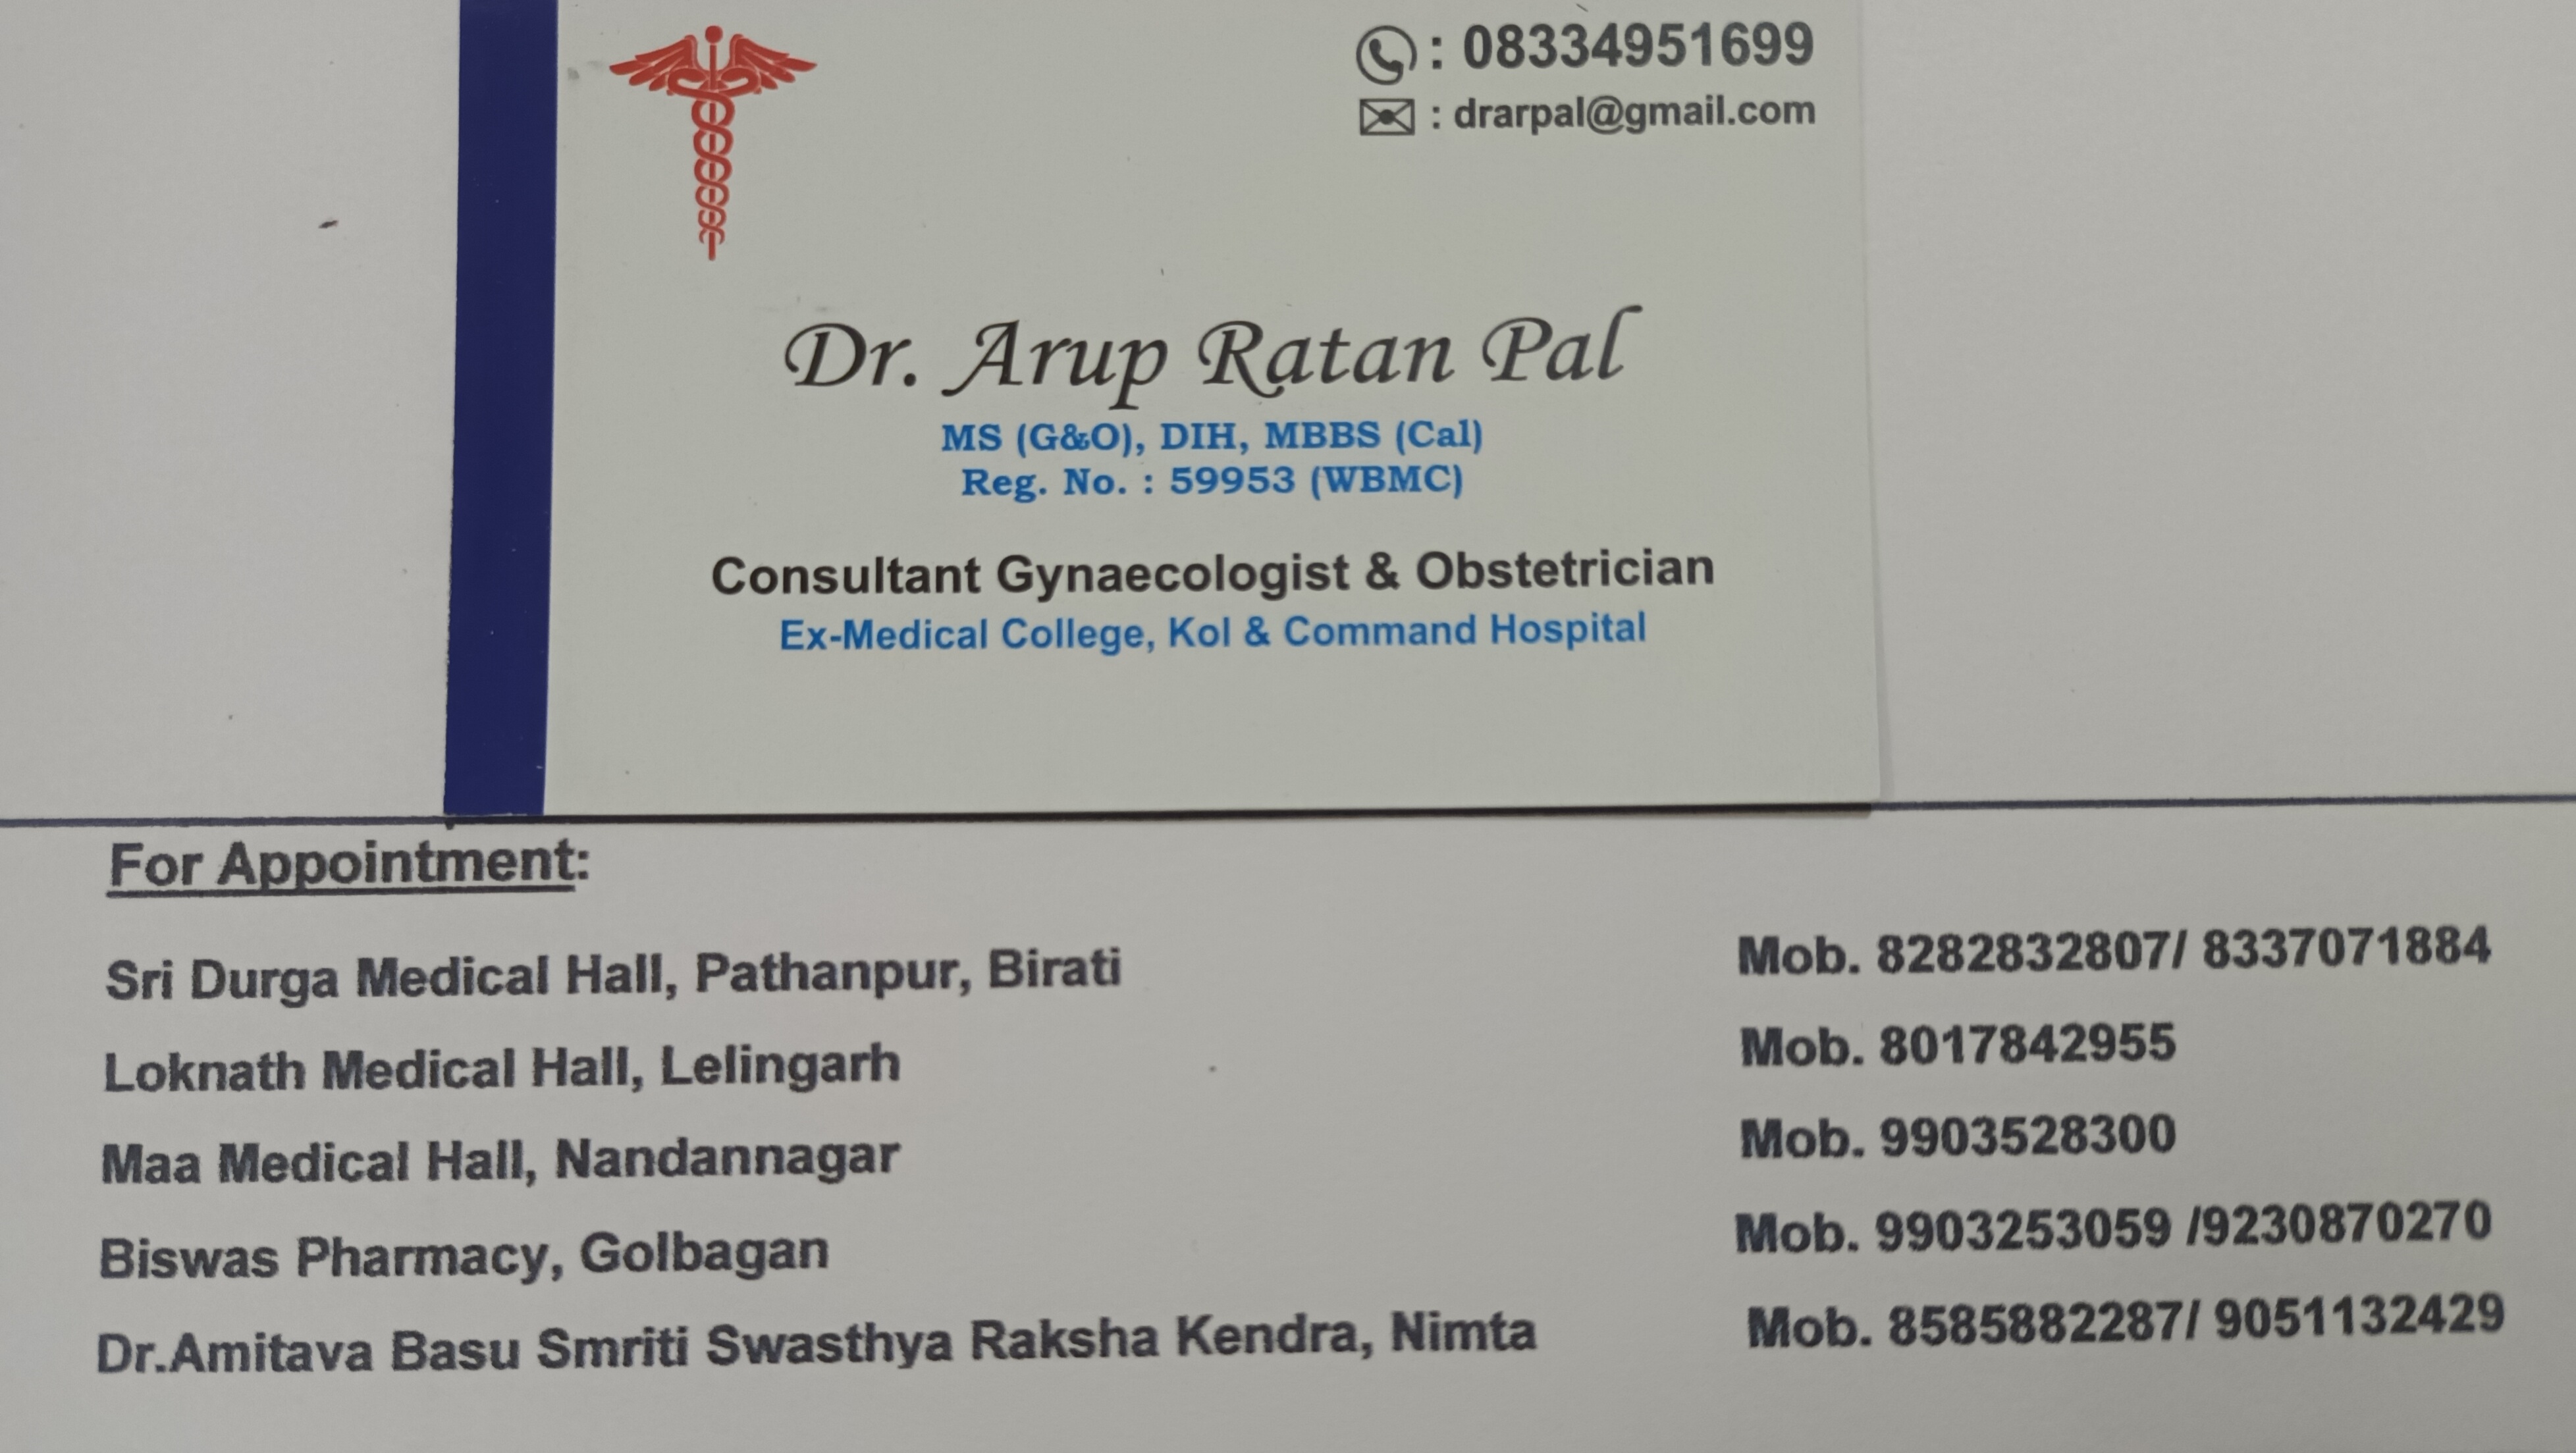 Gynaecologist obstetrician Dr. Arup Ratan Pal in Birati